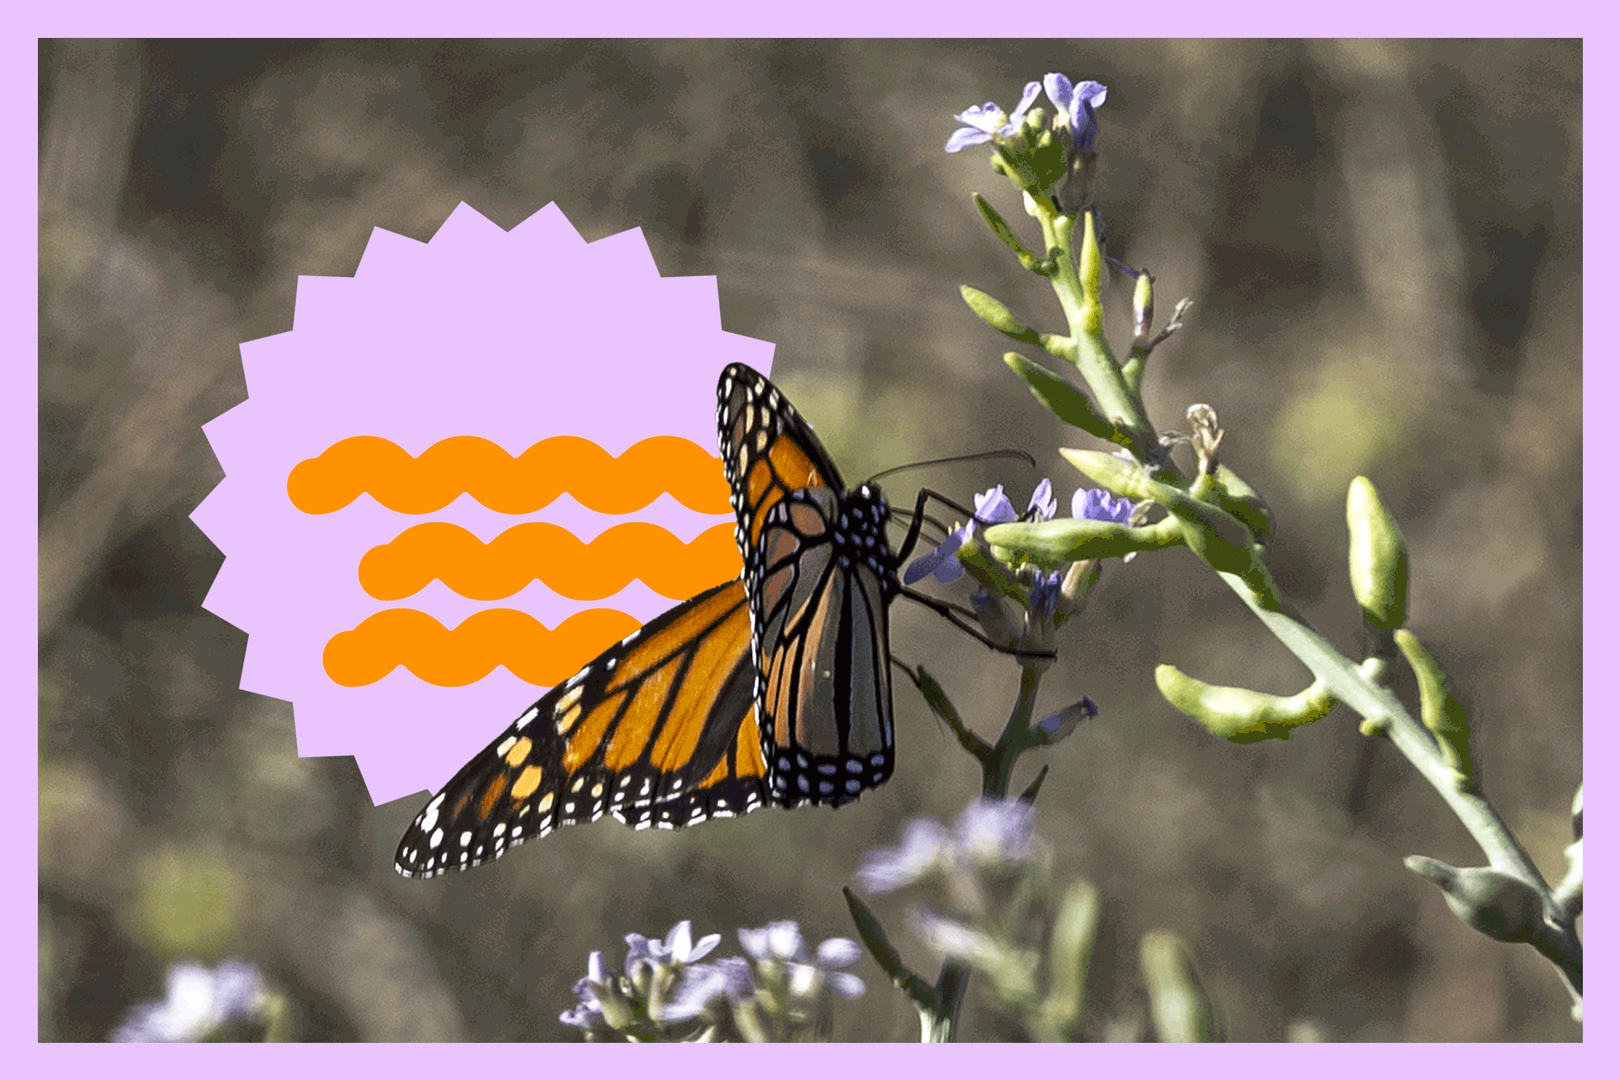 A monarch butterfly perched on a flower with an animated sunburst behind it